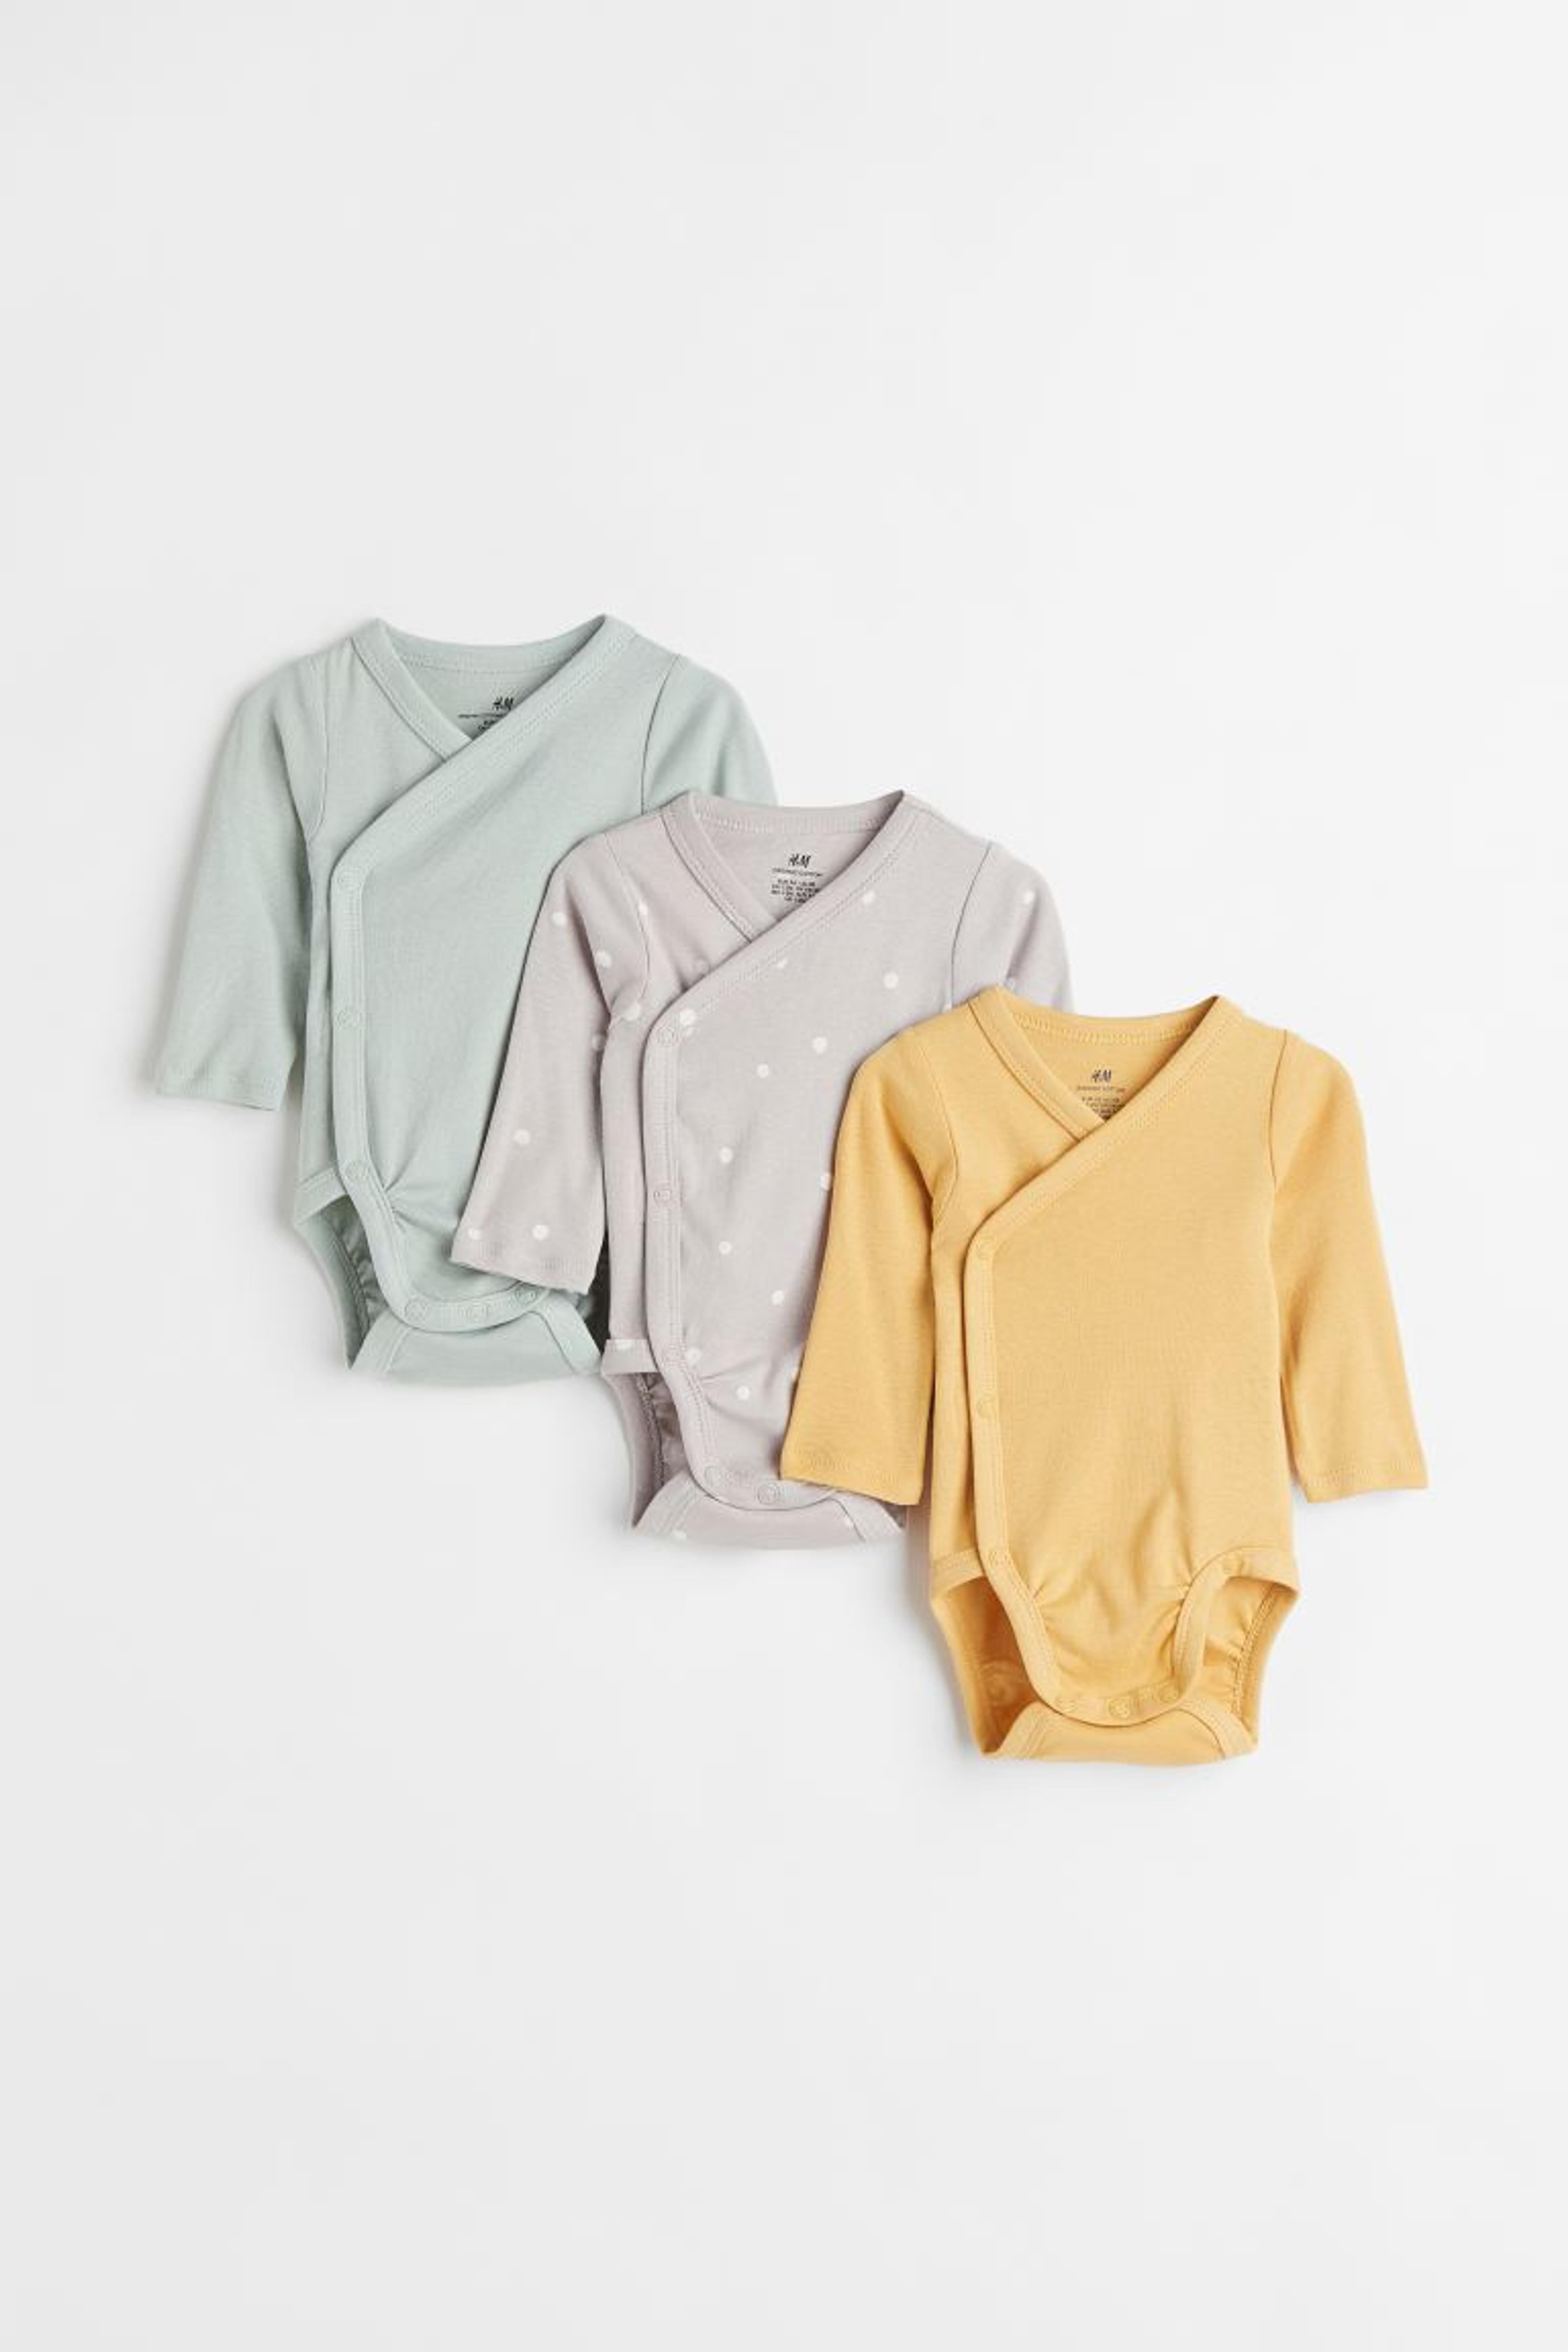 3-pack Long-sleeved Bodysuits - Yellow/turquoise/gray - Kids | H&M US